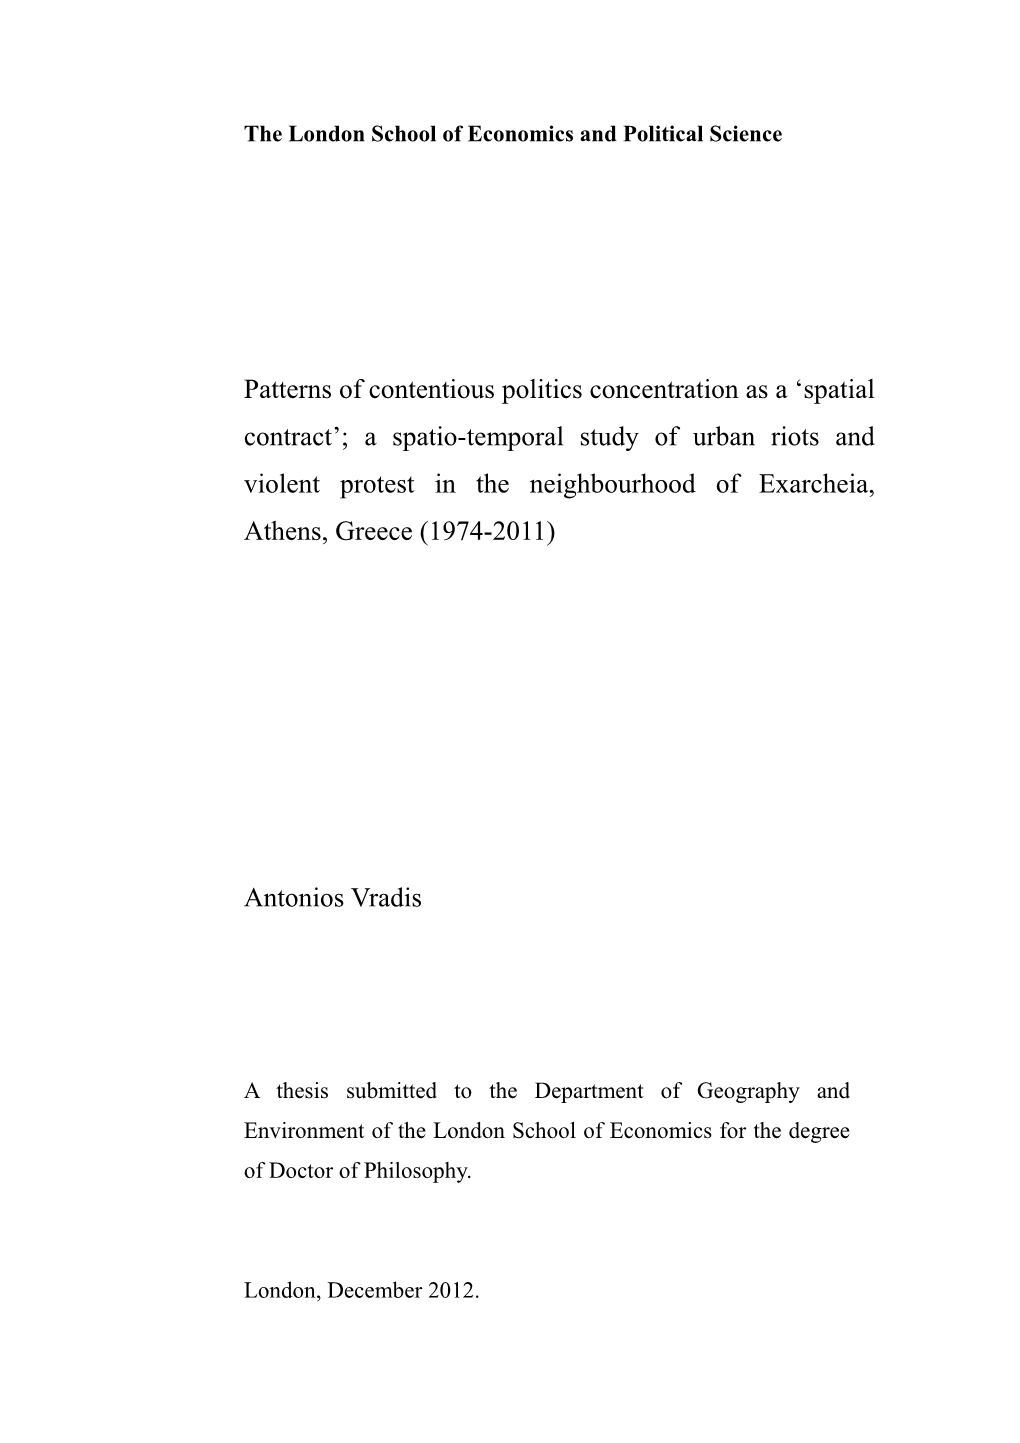 Patterns of Contentious Politics Concentration